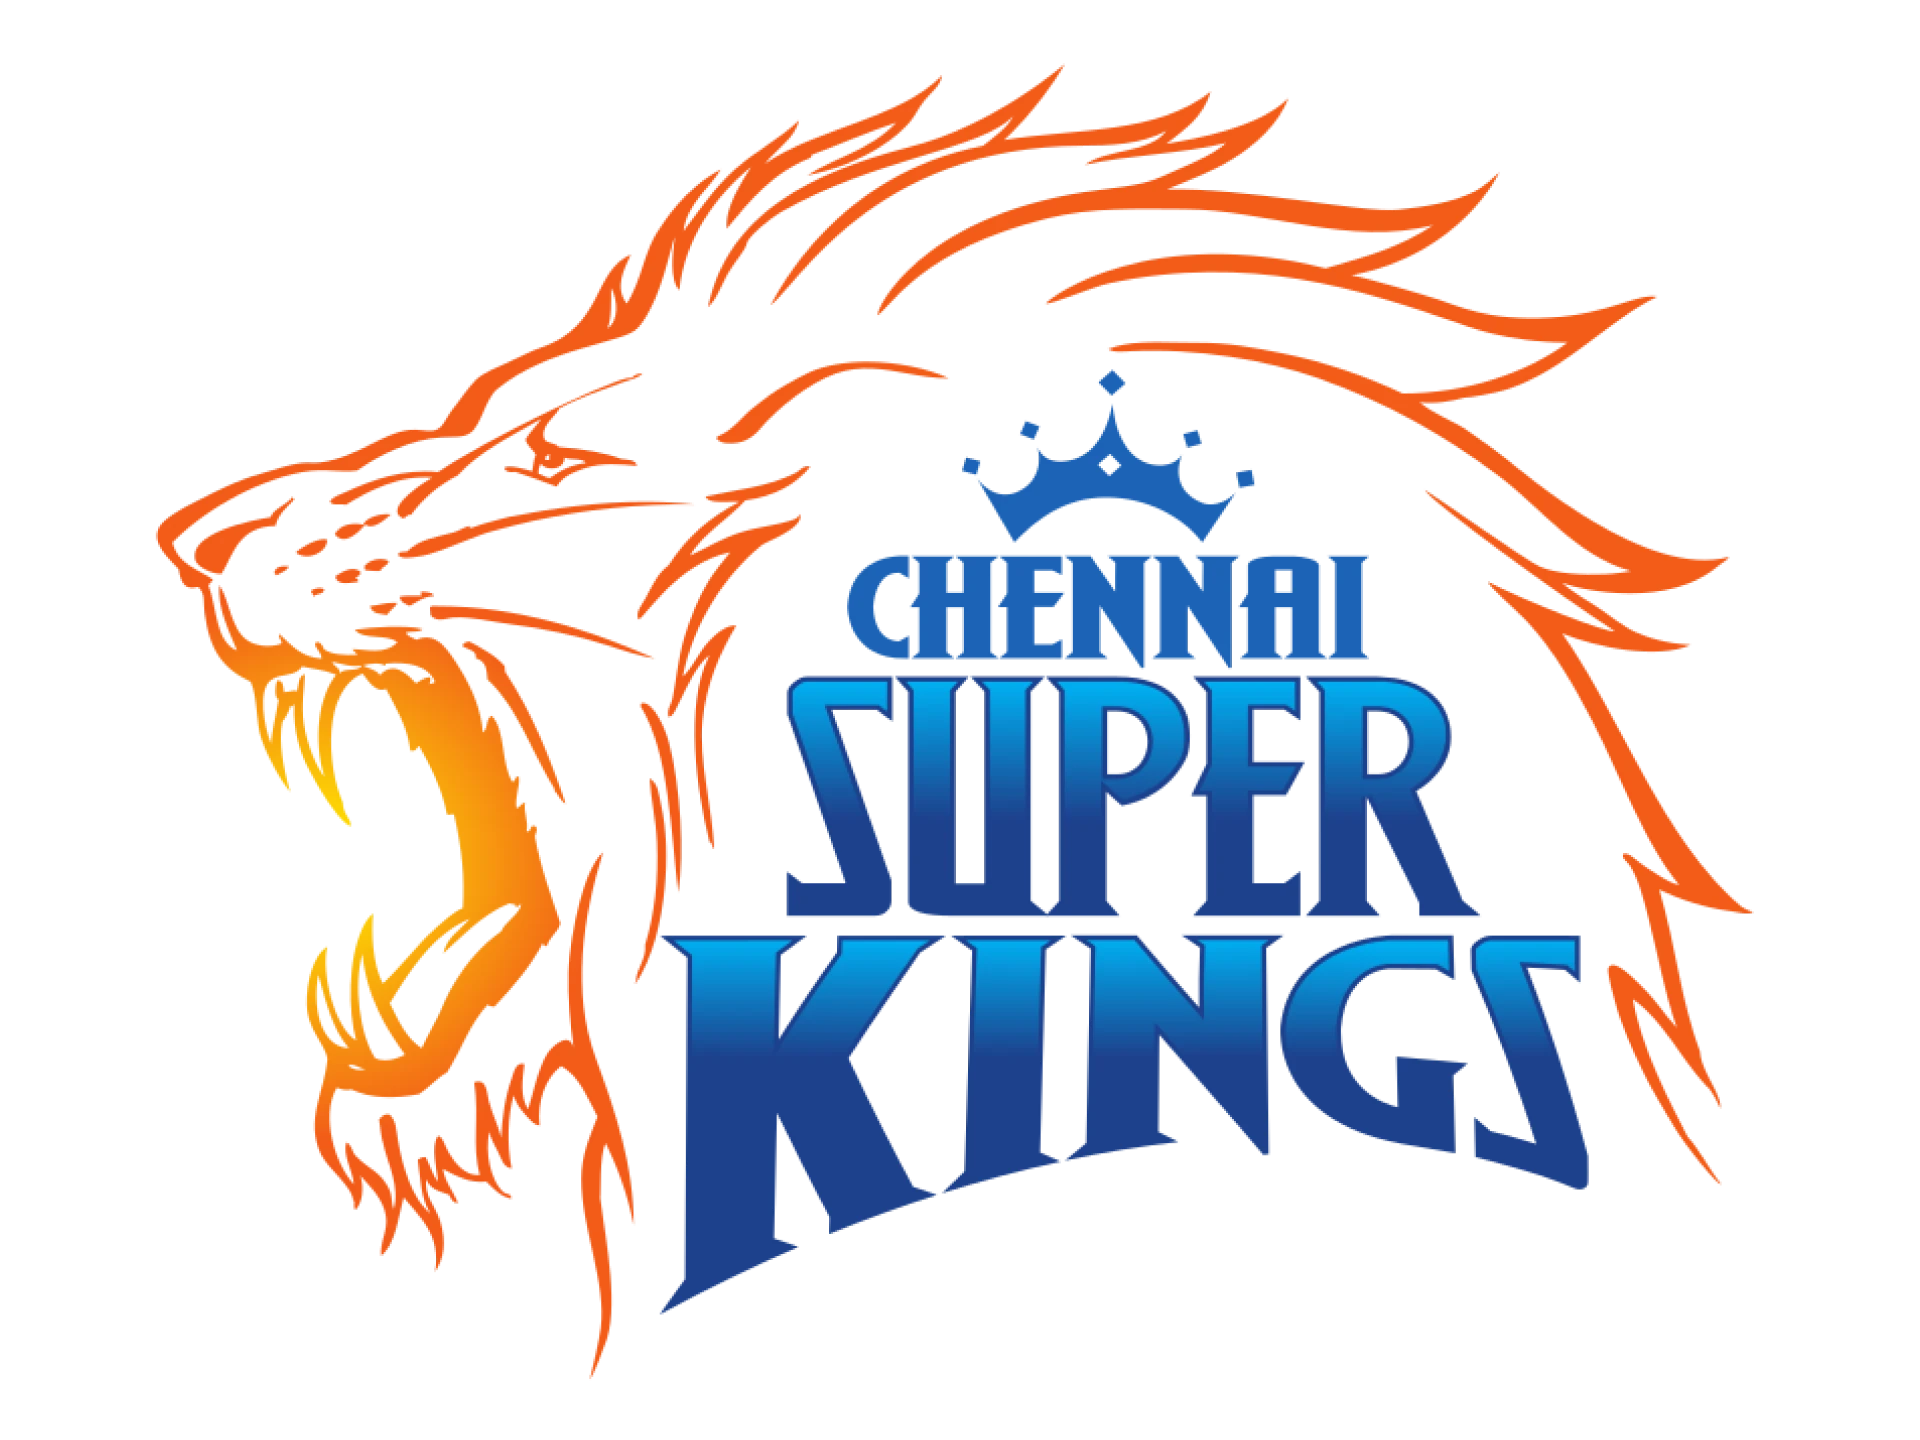 Chennai Super Kings were the winners of the last IPL, try betting on this team.